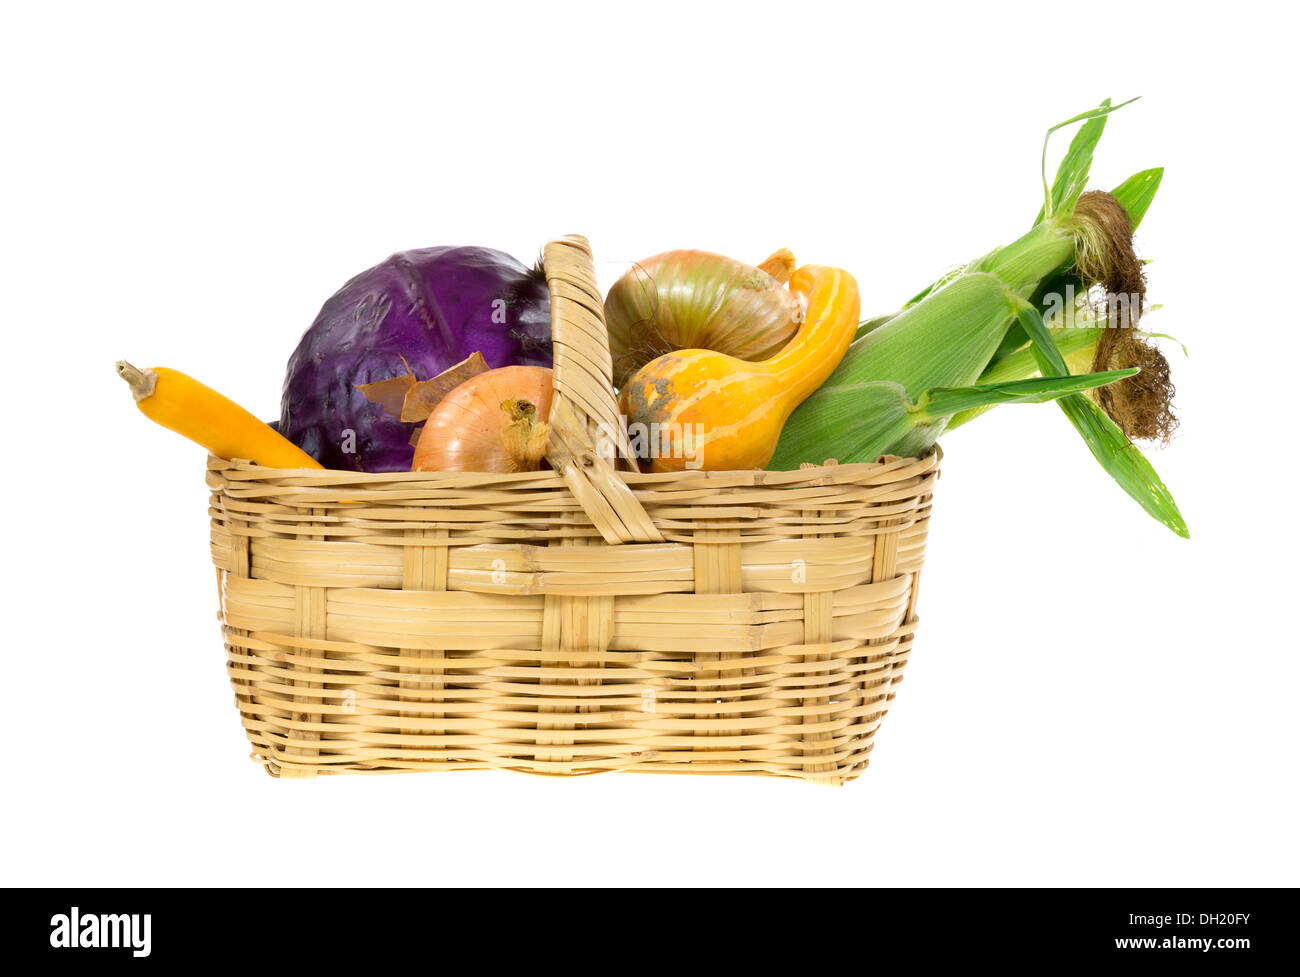 Corn, gourds, onions and red cabbage in an old wicker basket on a white background. Stock Photo